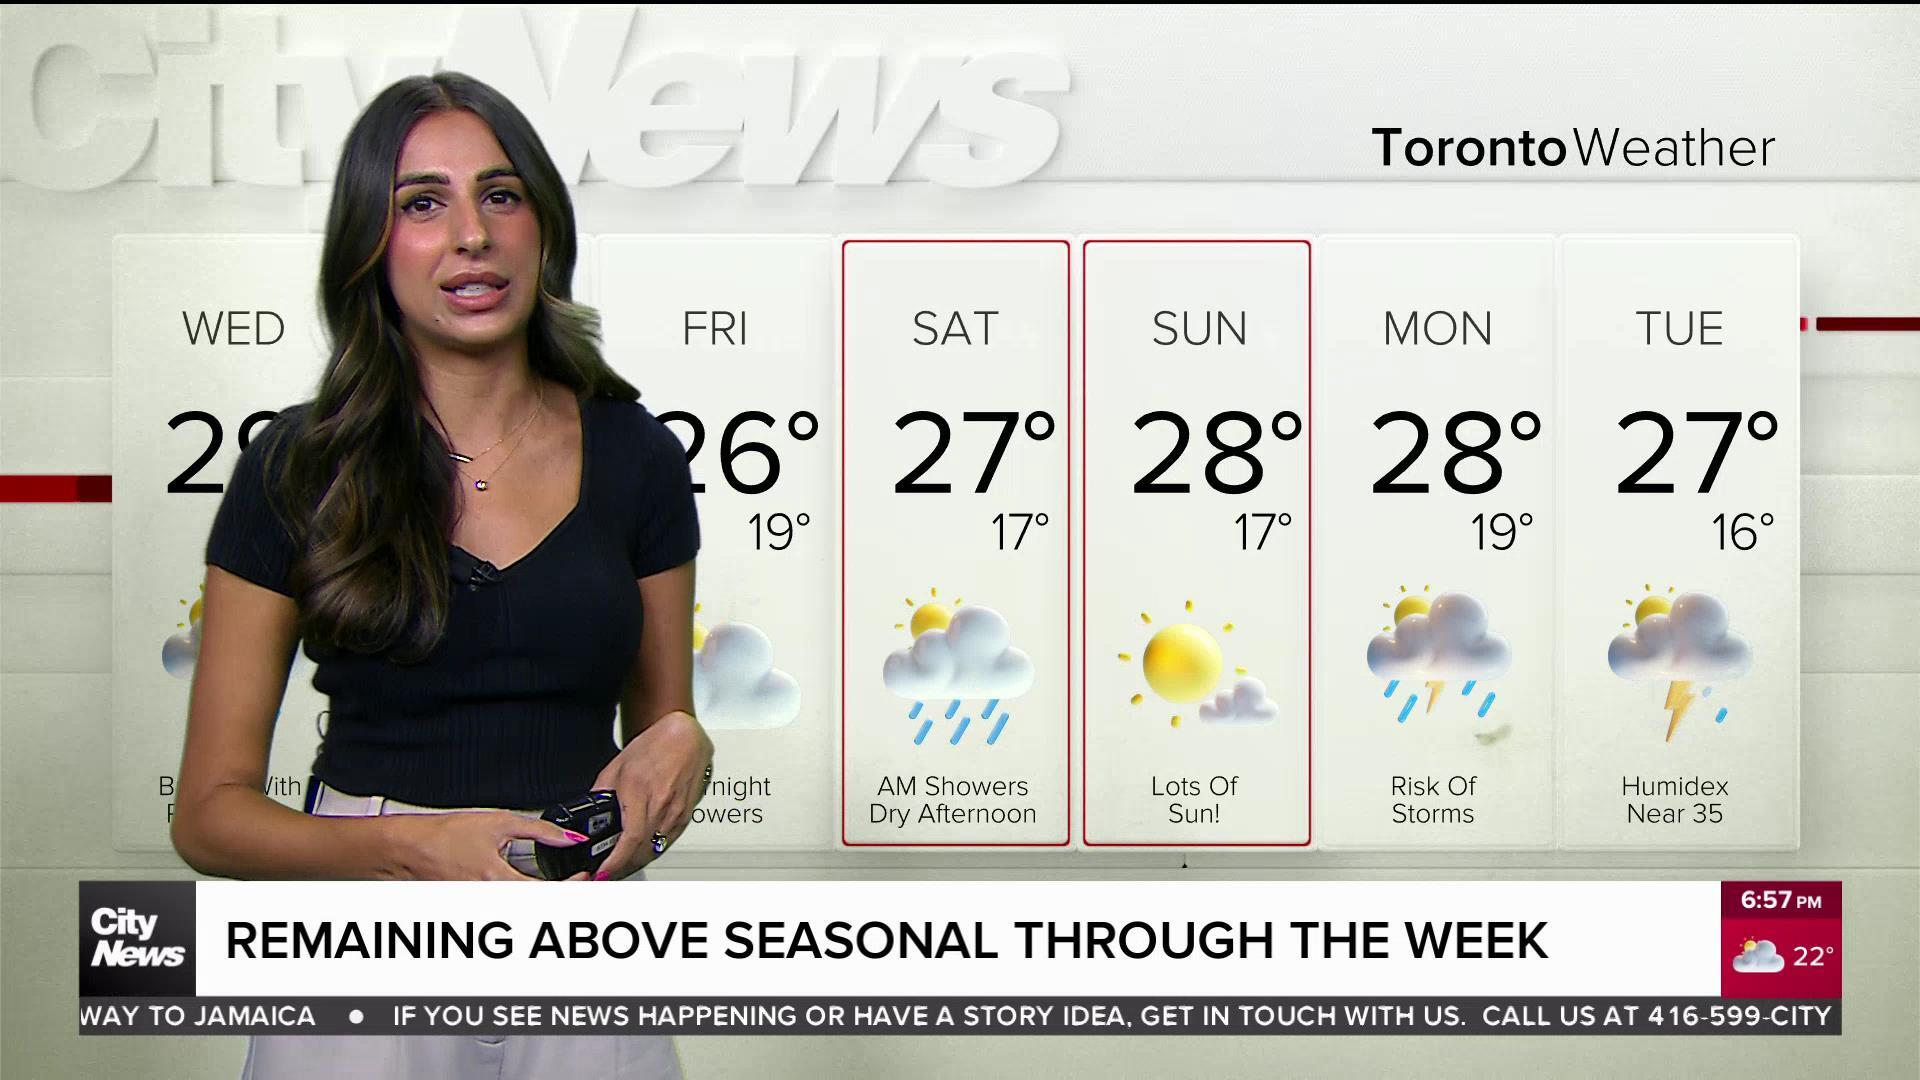 Above seasonal temperatures in the GTA for the week